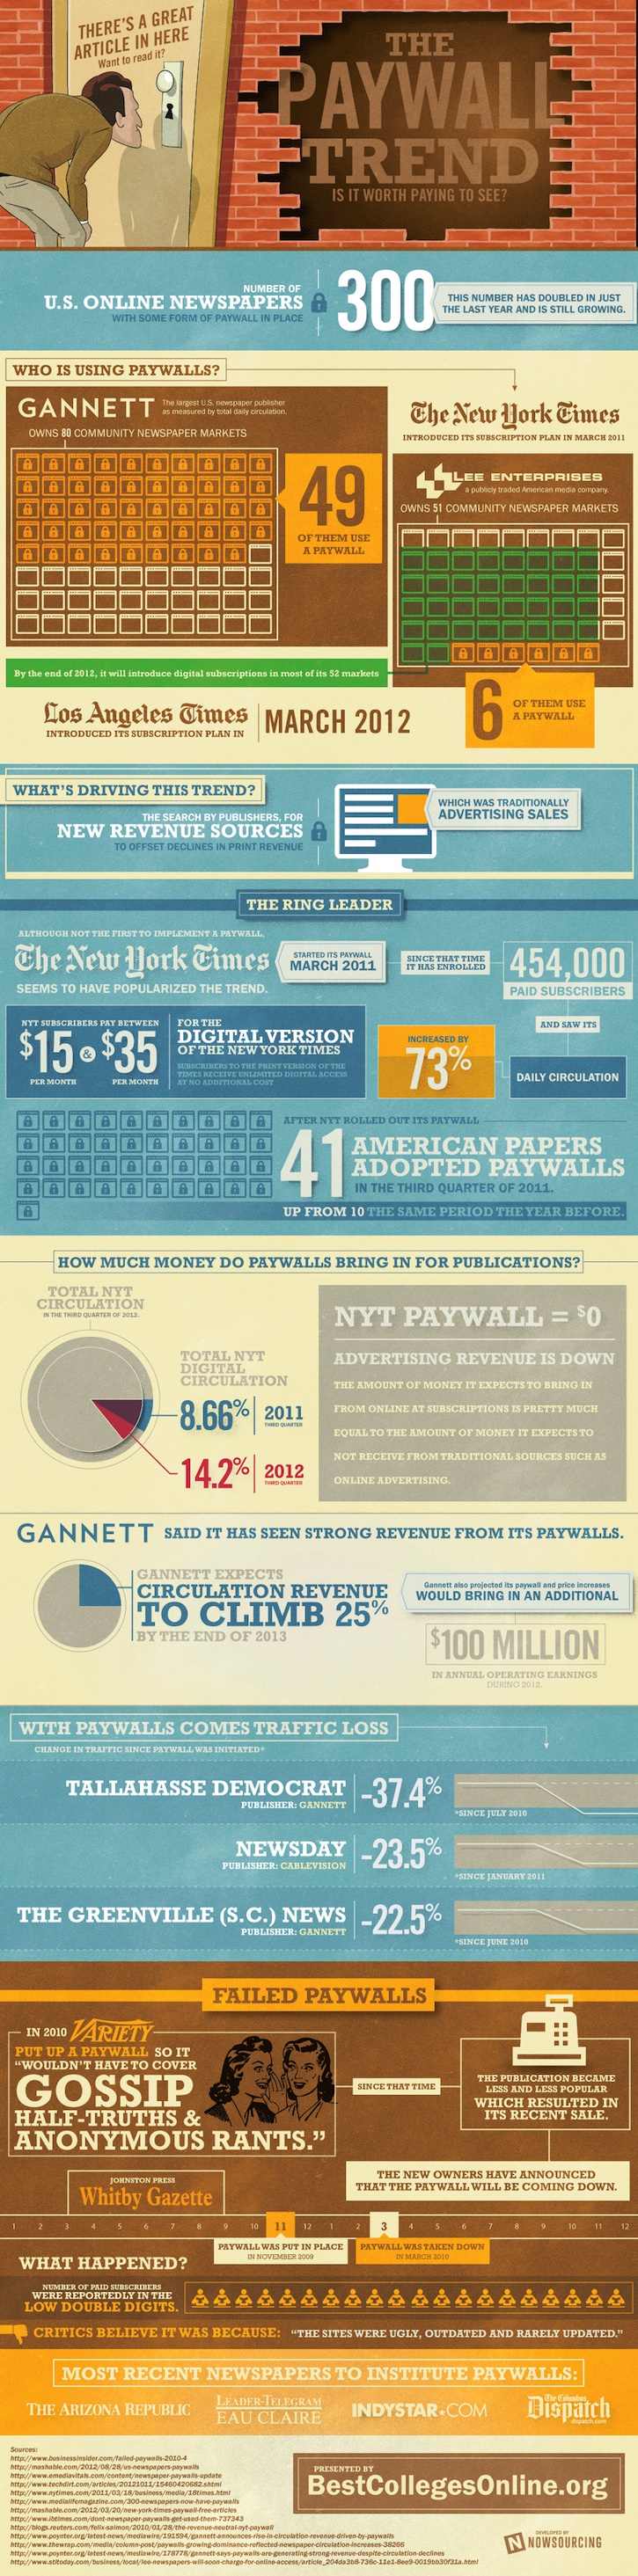 Newspaper Website Paywall Trend Infographic